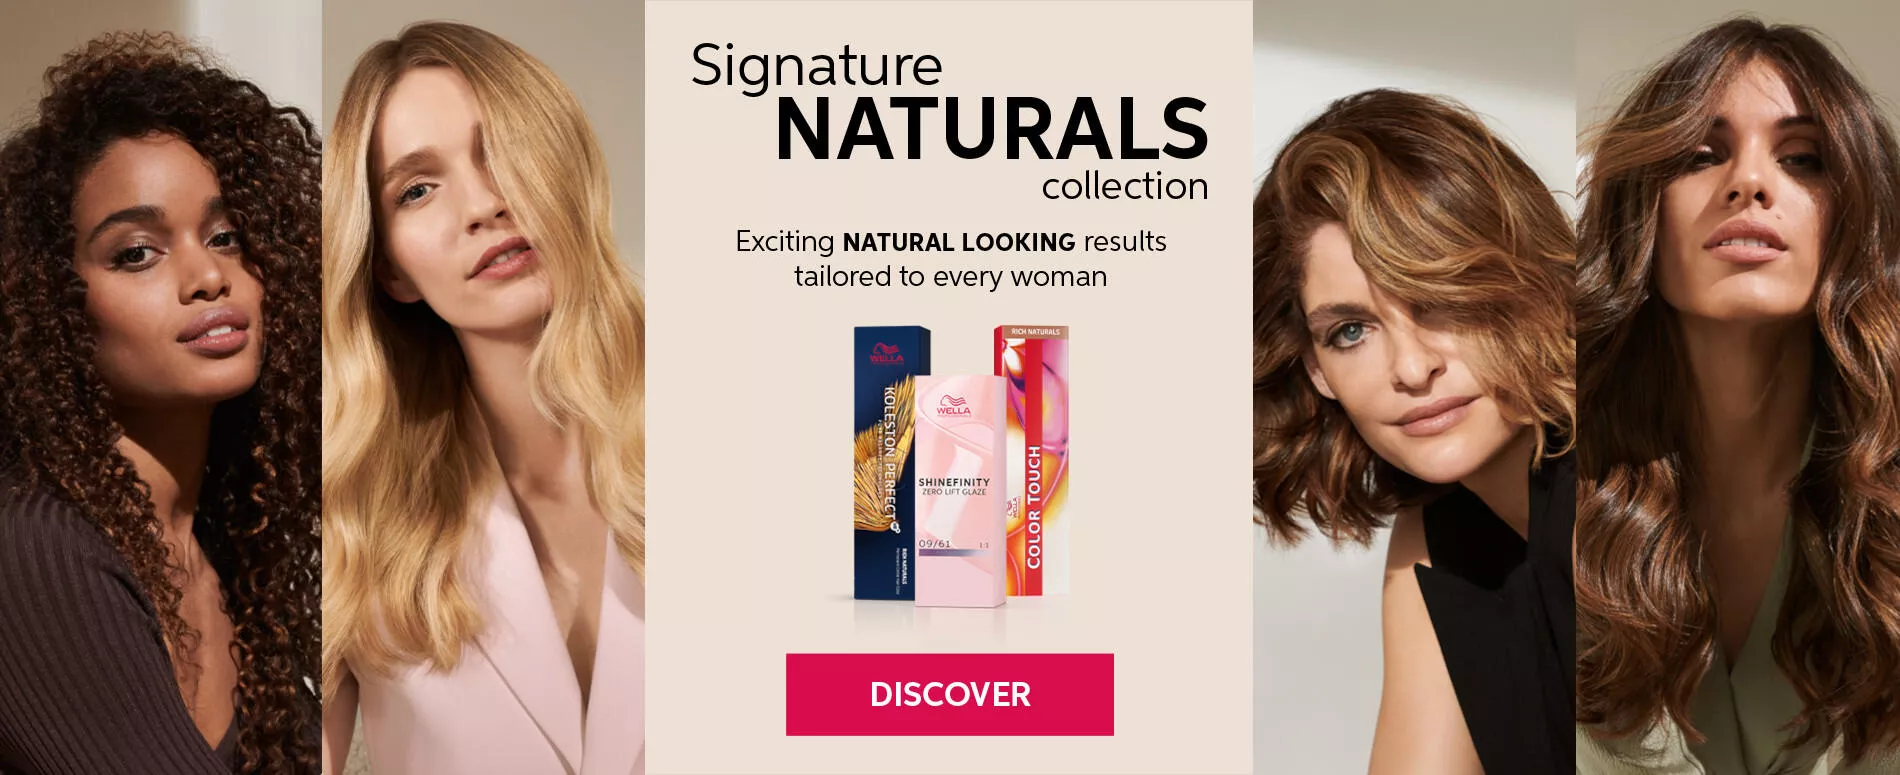 Signature Naturals collection banner